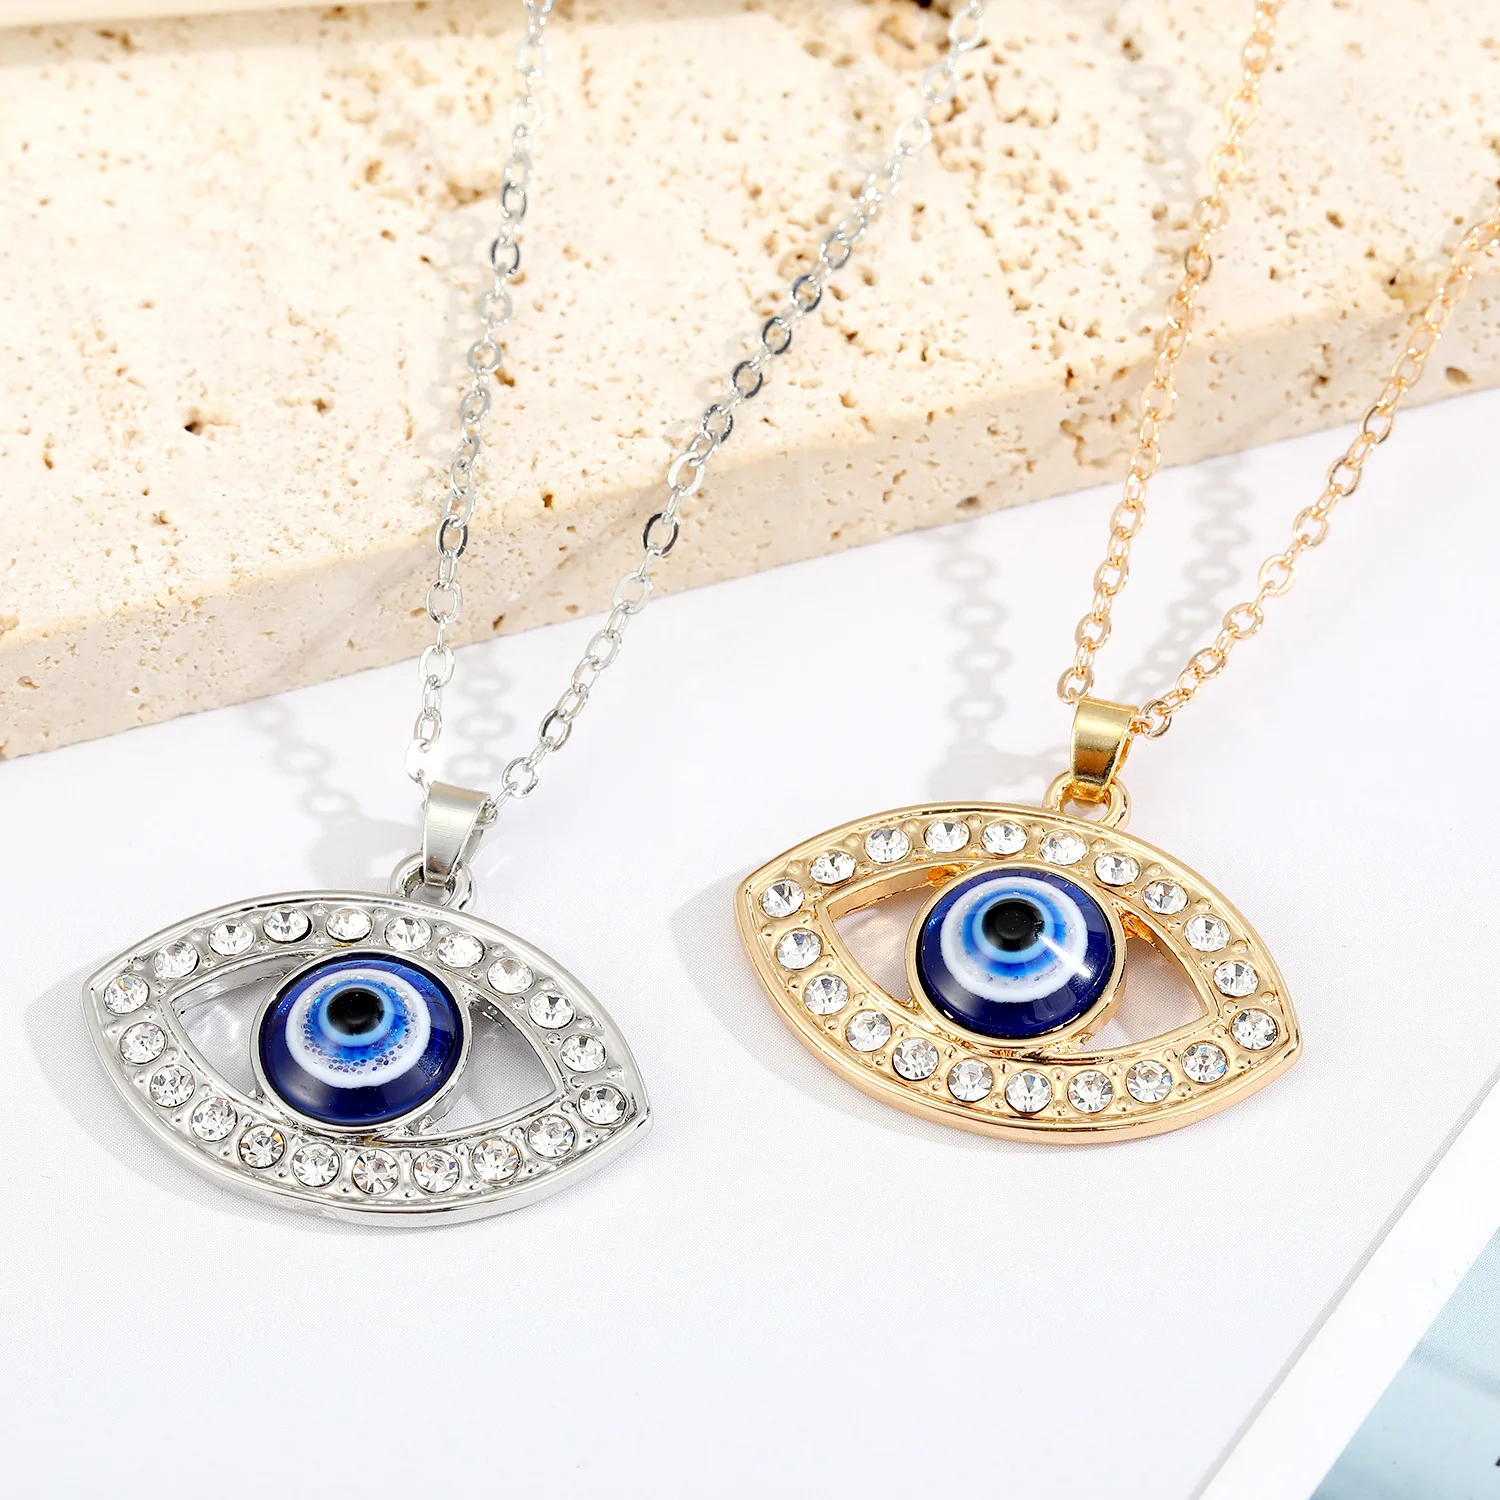 

Shiny Hollow Evil Eye Pendant Necklaces For Women Jewelry Turkish Blue Eye Sweater Clavicle Chain Necklace